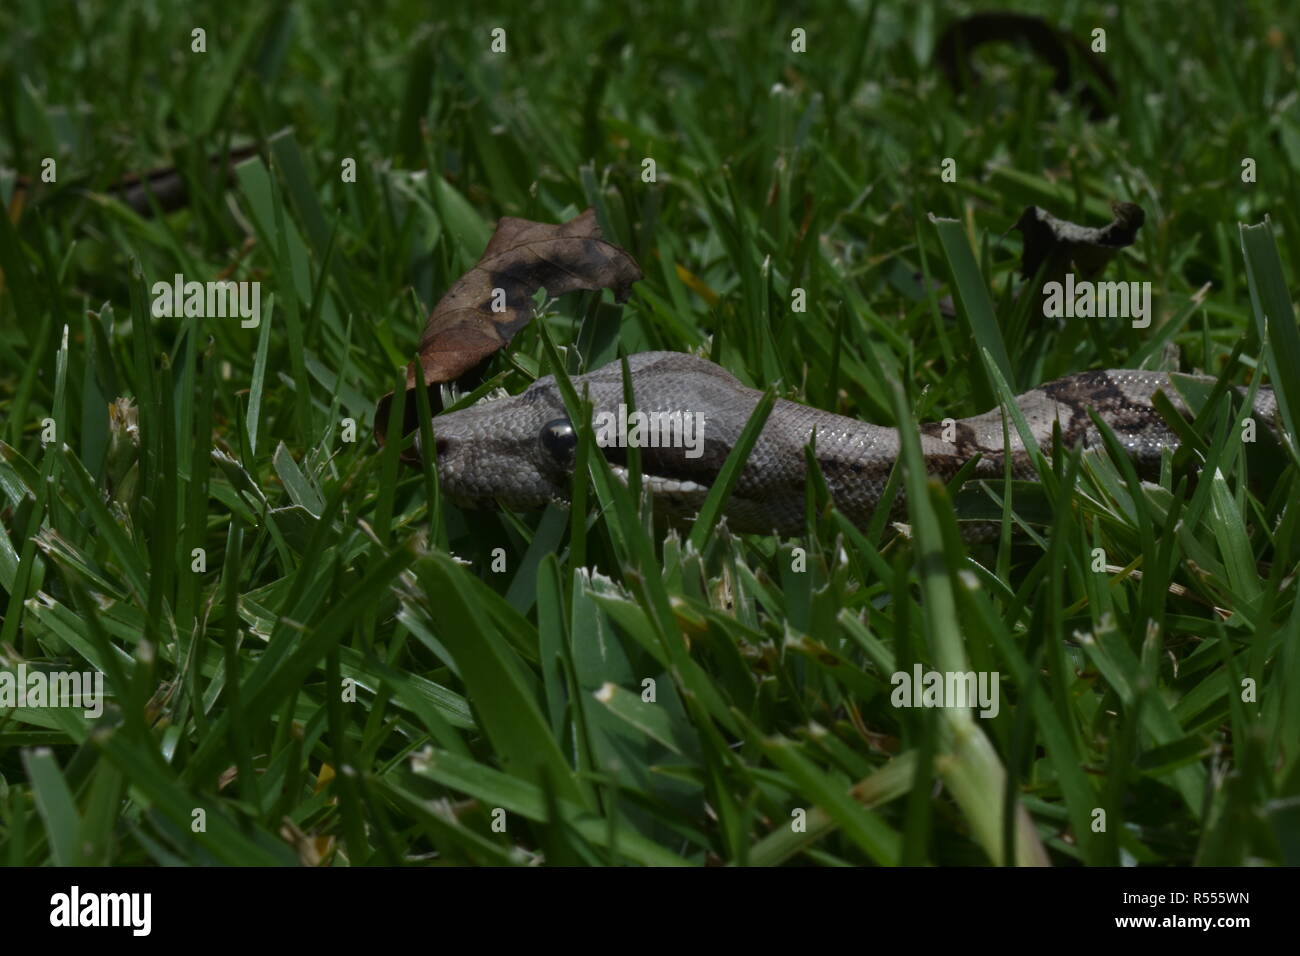 Close-up of a 1 year old  Columbian Red Tail Boa in the grass. Stock Photo